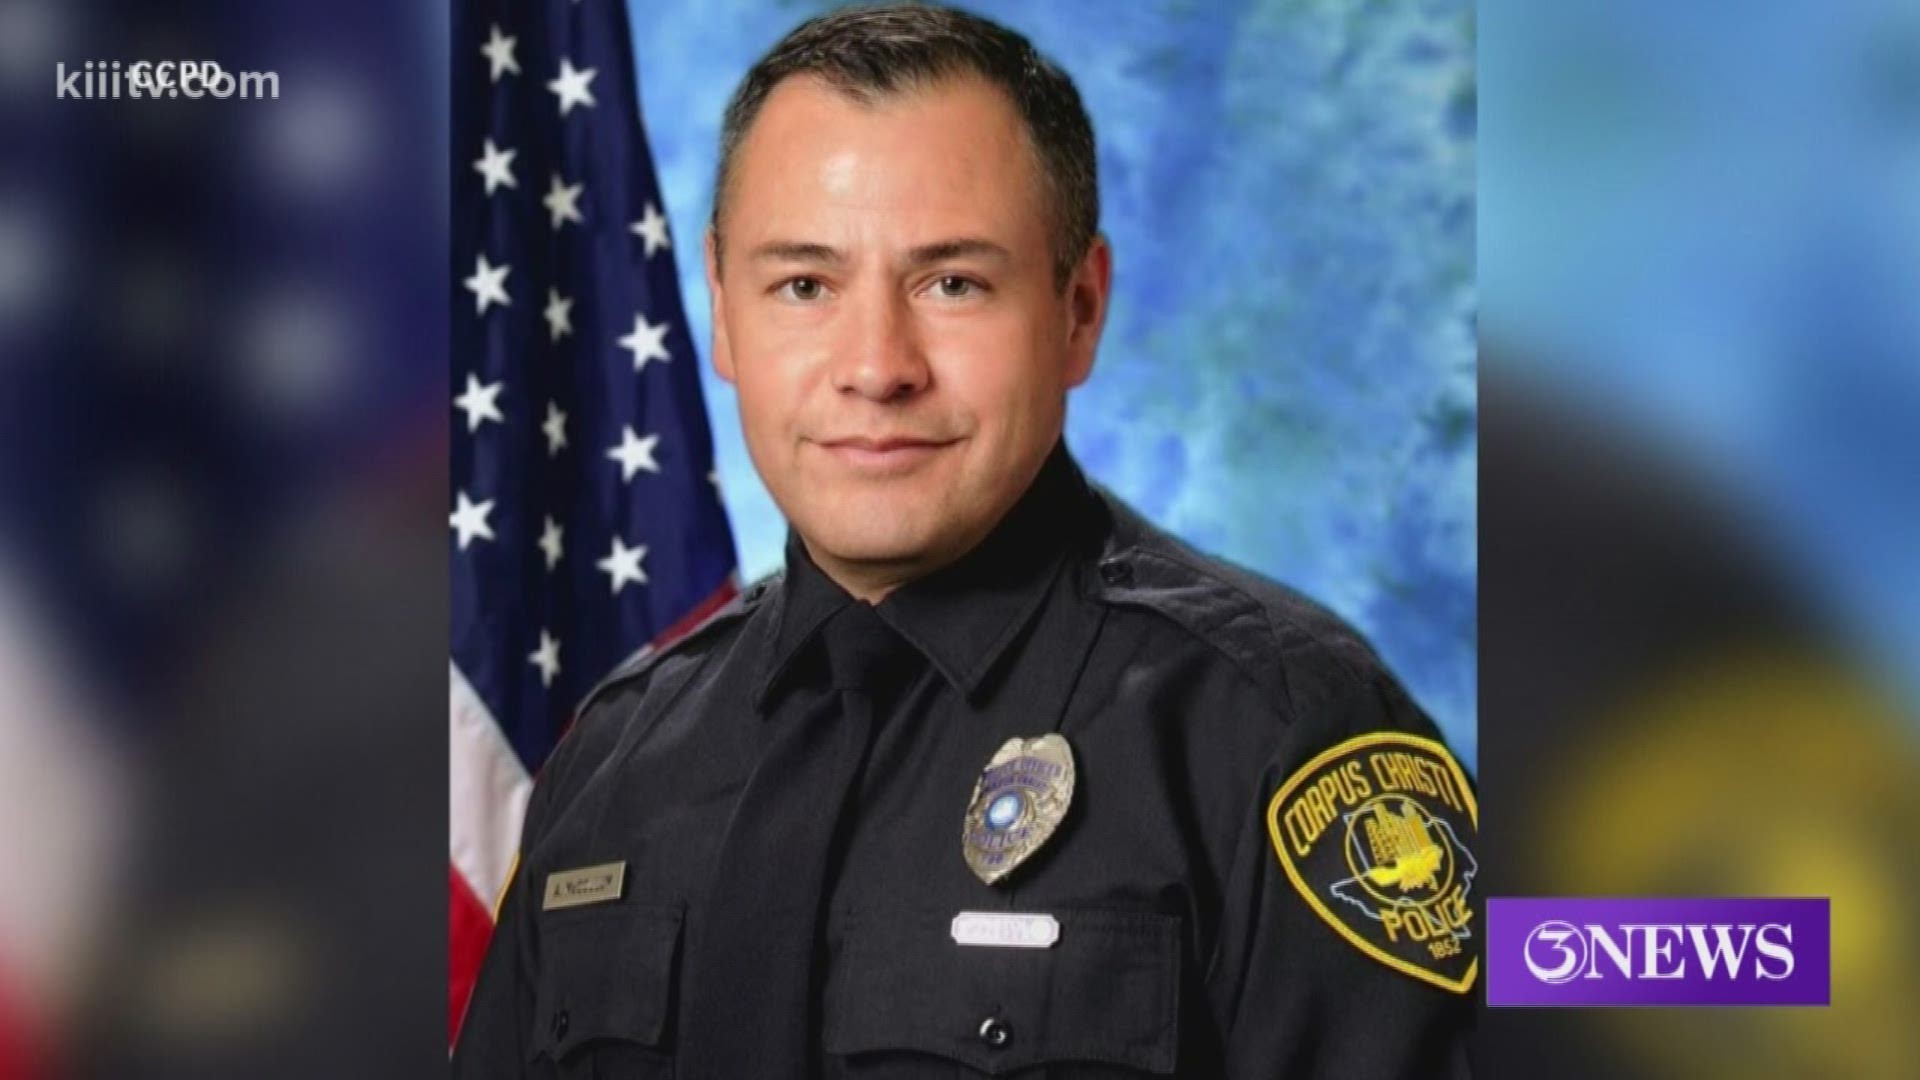 A wrongful death lawsuit has been filed in the wake of the tragic death of Corpus Christi Police Department Officer Alan McCollum.